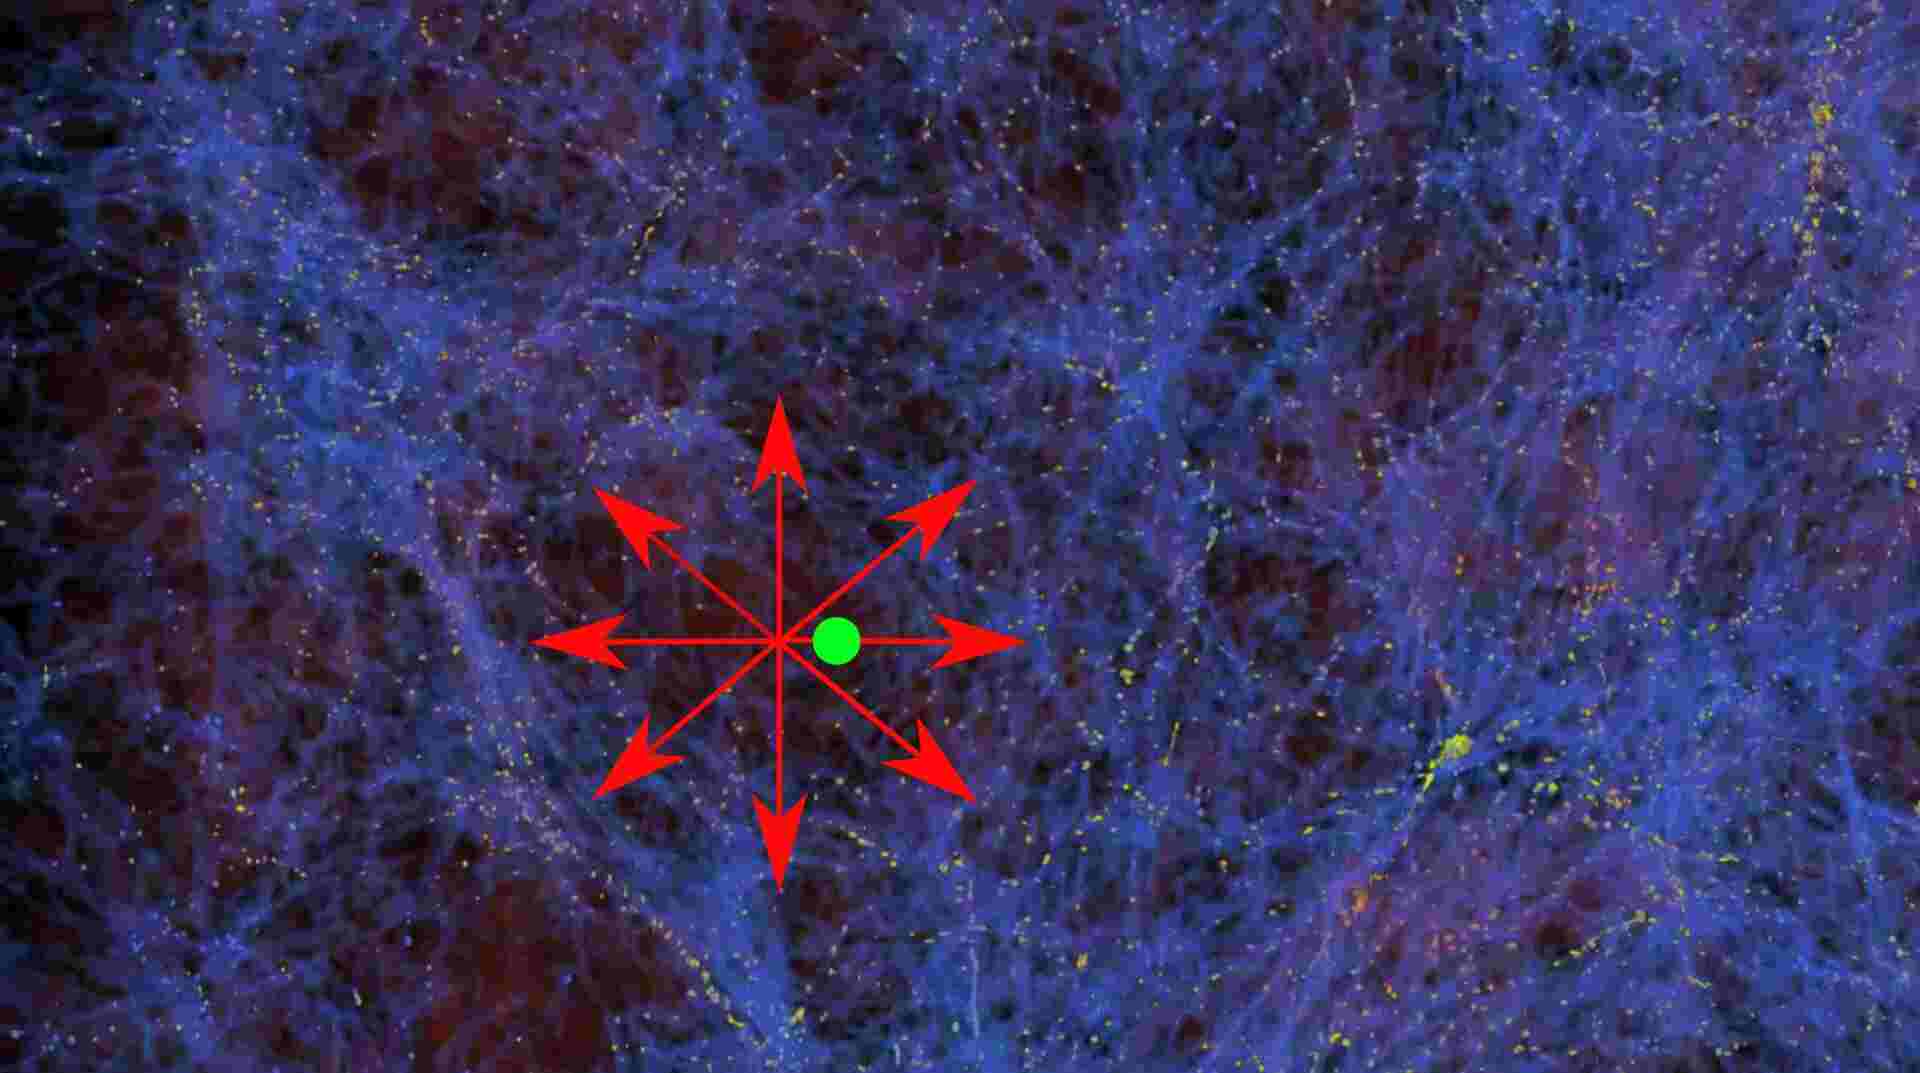 The image depicts the distribution of matter in space, where the blue color represents the matter and the yellow dots represent individual galaxies. The Milky Way, shown in green, is located in an area with low matter density. The galaxies within the bubble move towards the direction of higher matter densities, as indicated by the red arrows. This suggests that the universe is expanding faster inside the bubble. The image is credited to AG Kroupa from the University of Bonn.